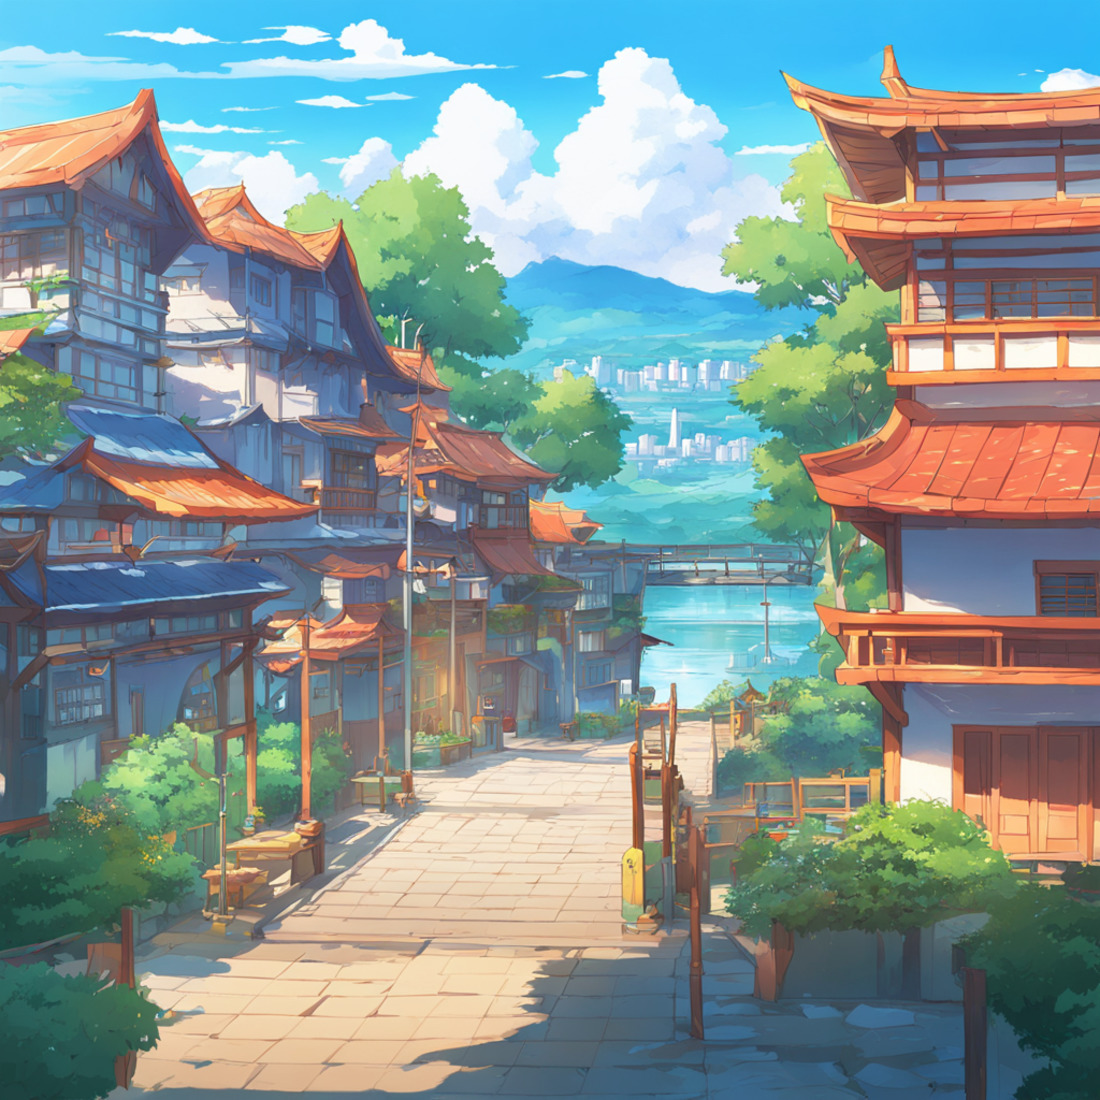 Places and landscapes in anime style preview image.